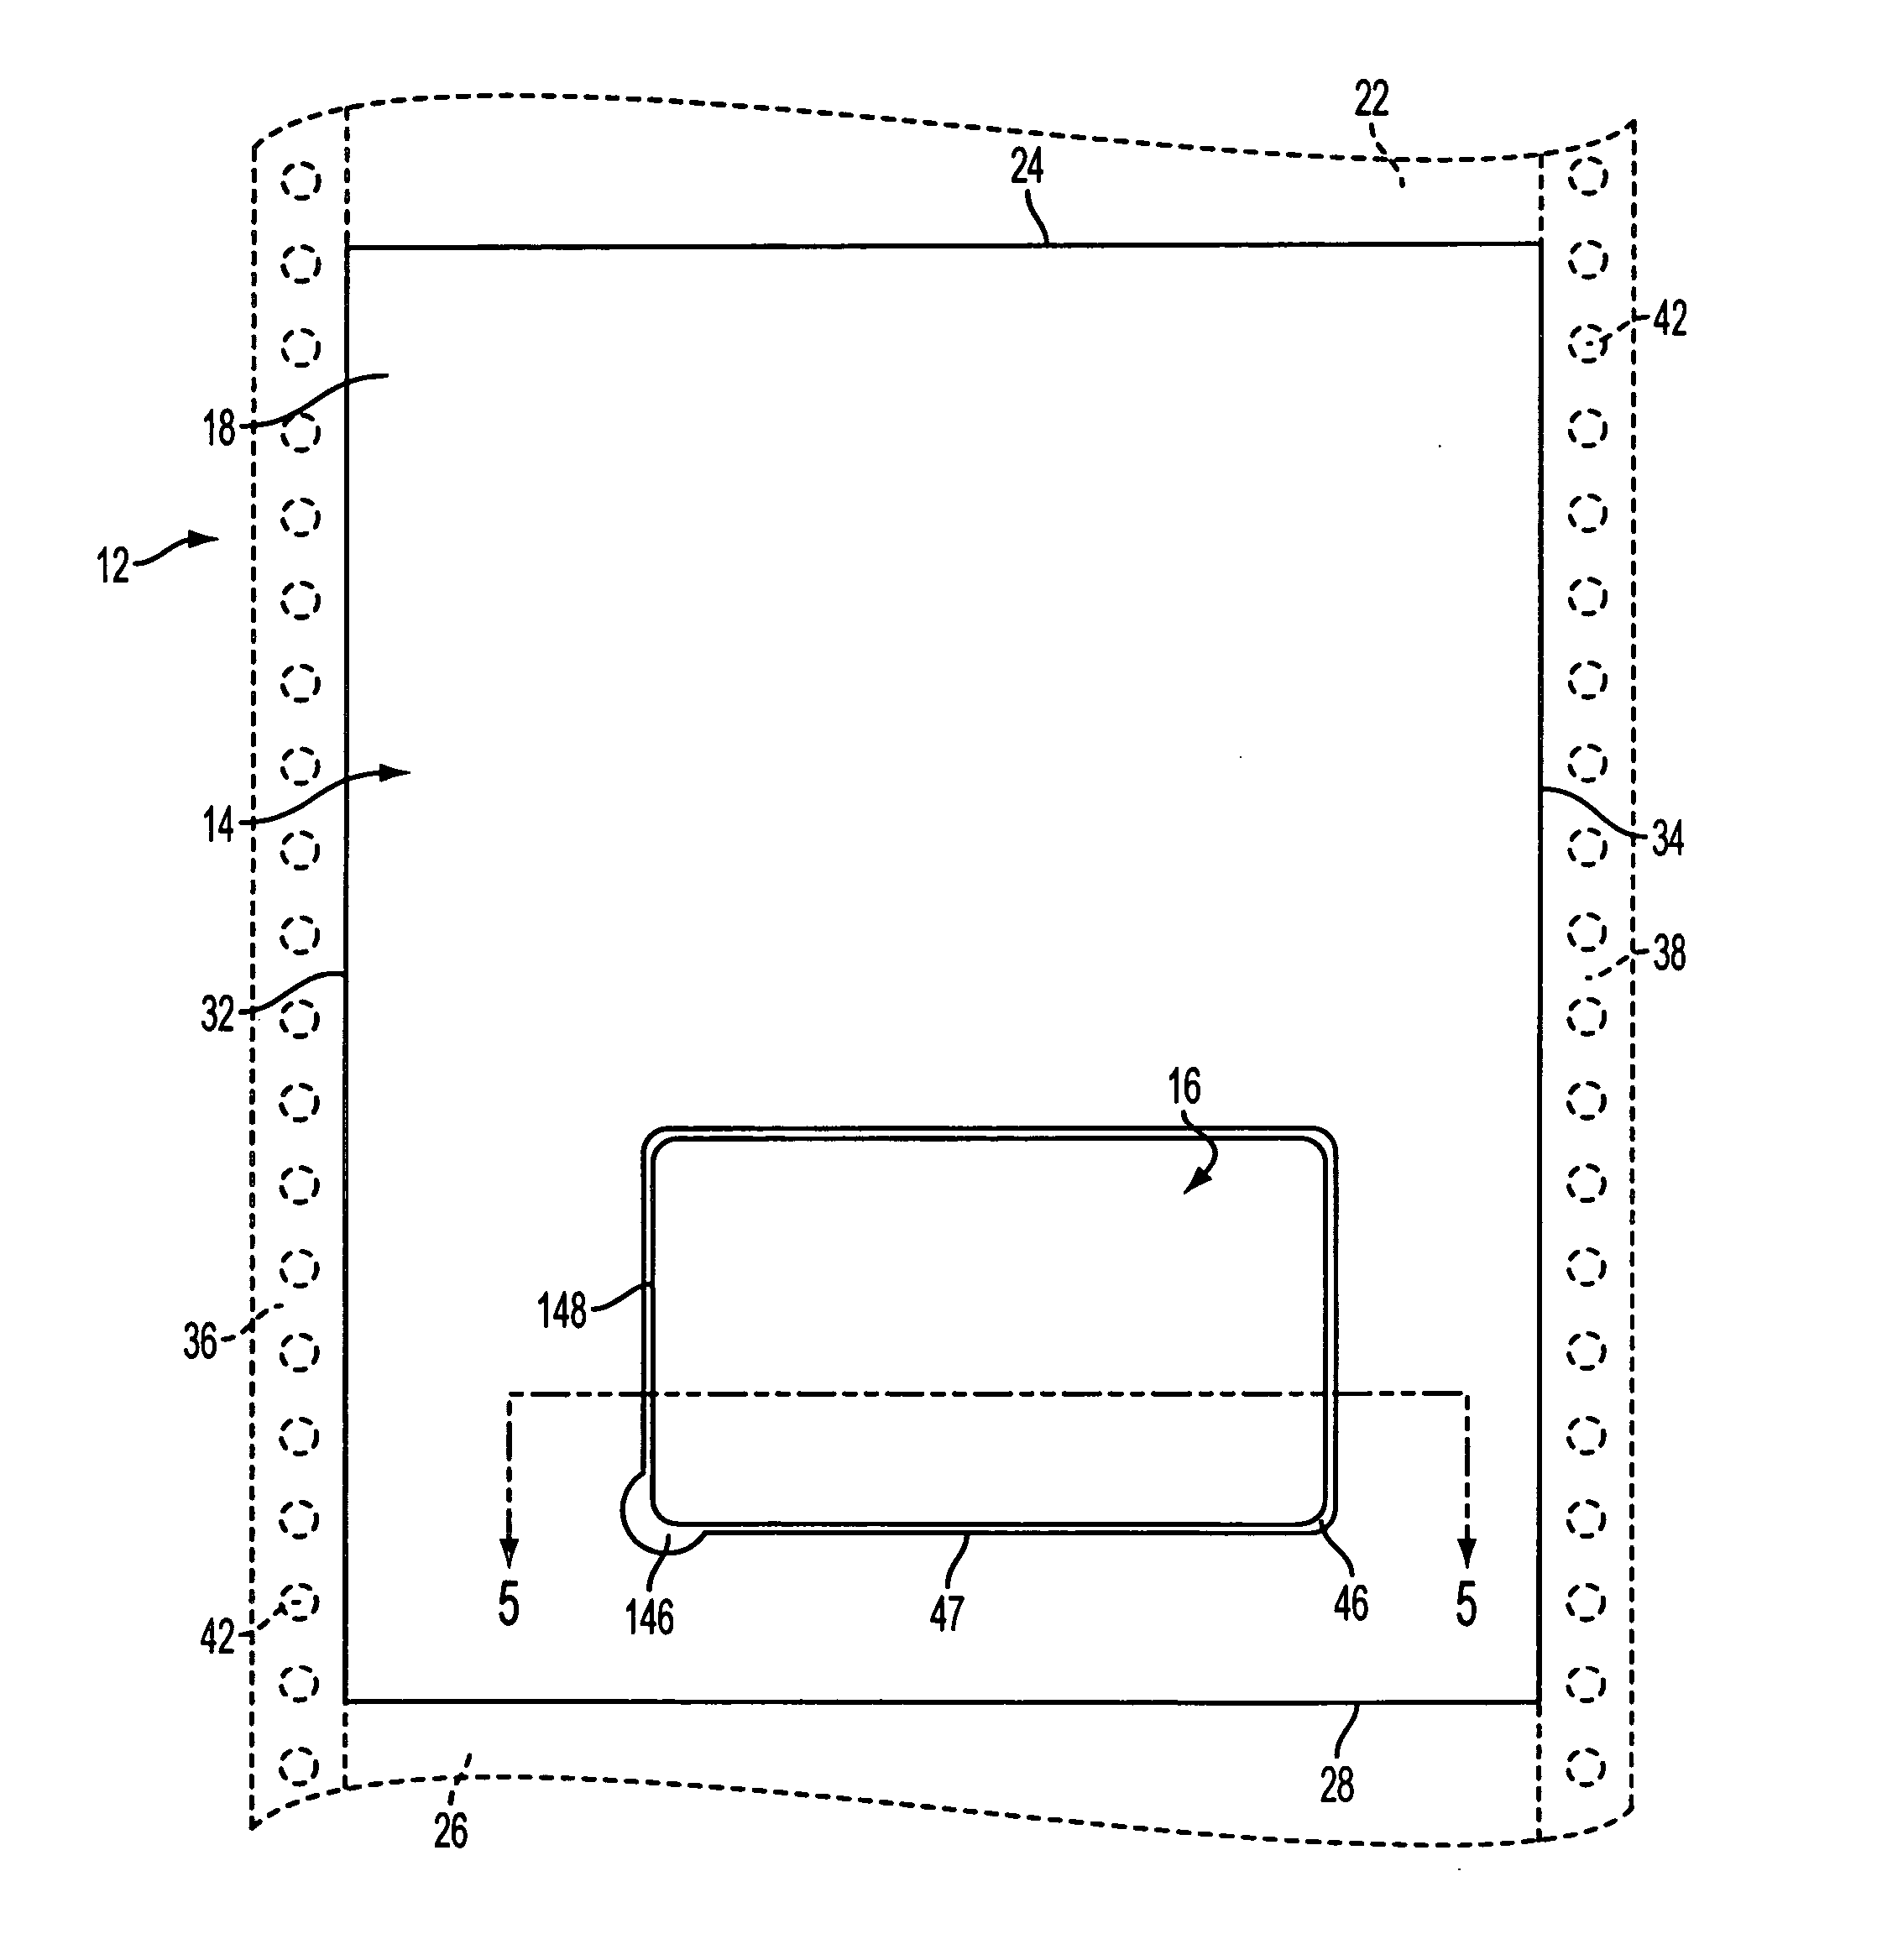 Document sheet with recessed cavity having an access tab for an object received therein